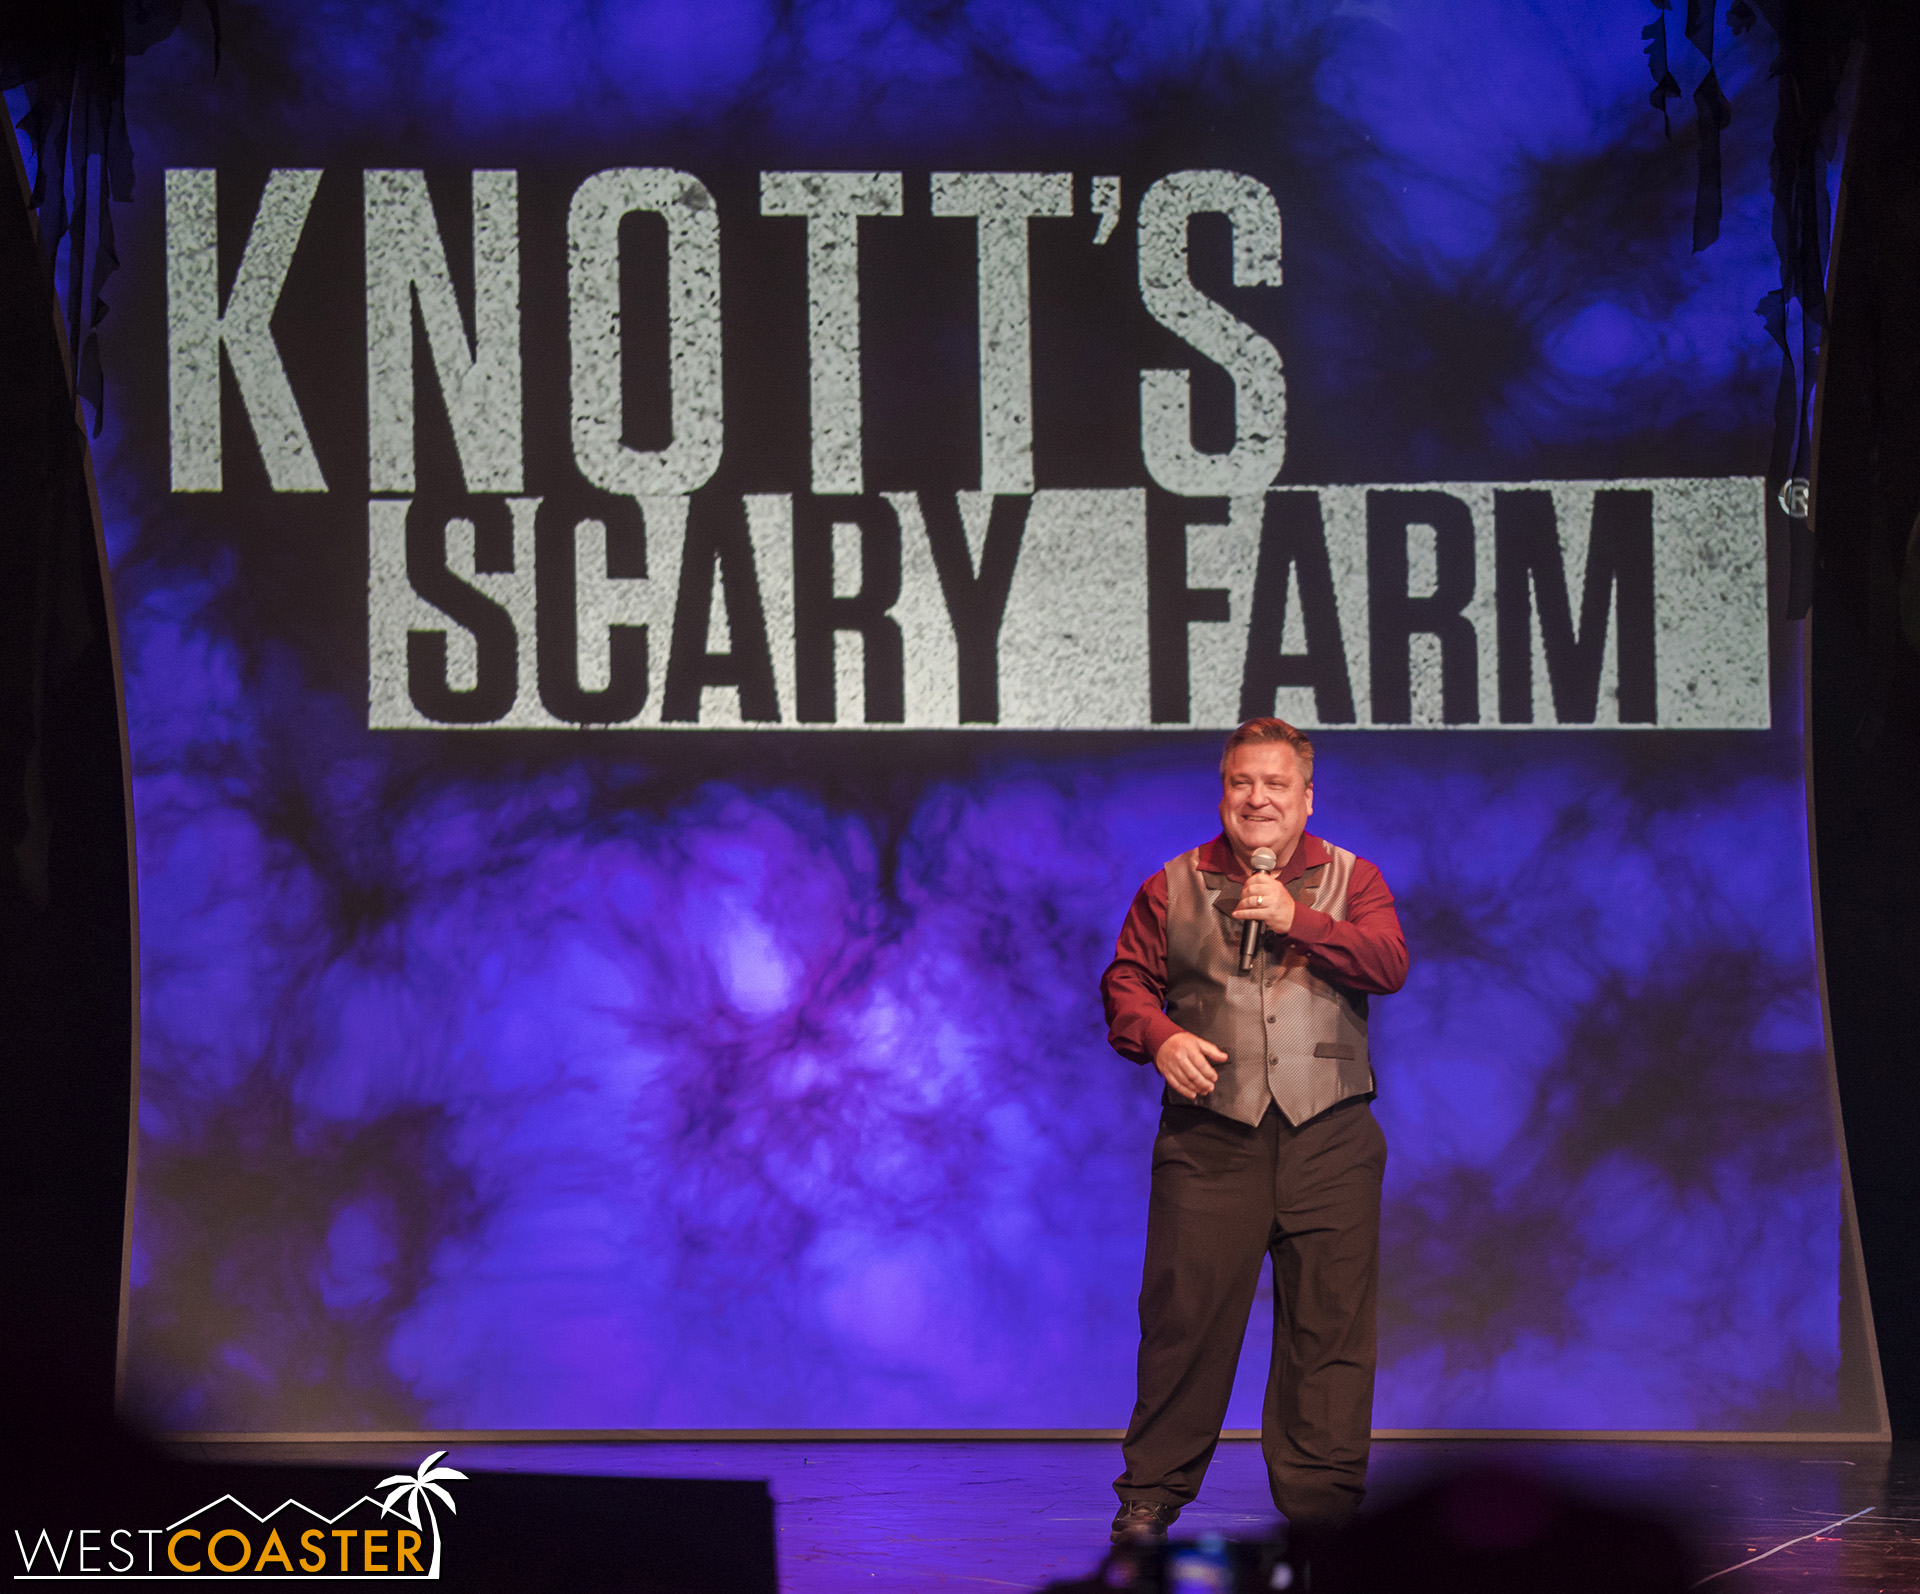  It’s Jeff Tucker, here to spill the Scary Farm beans! 